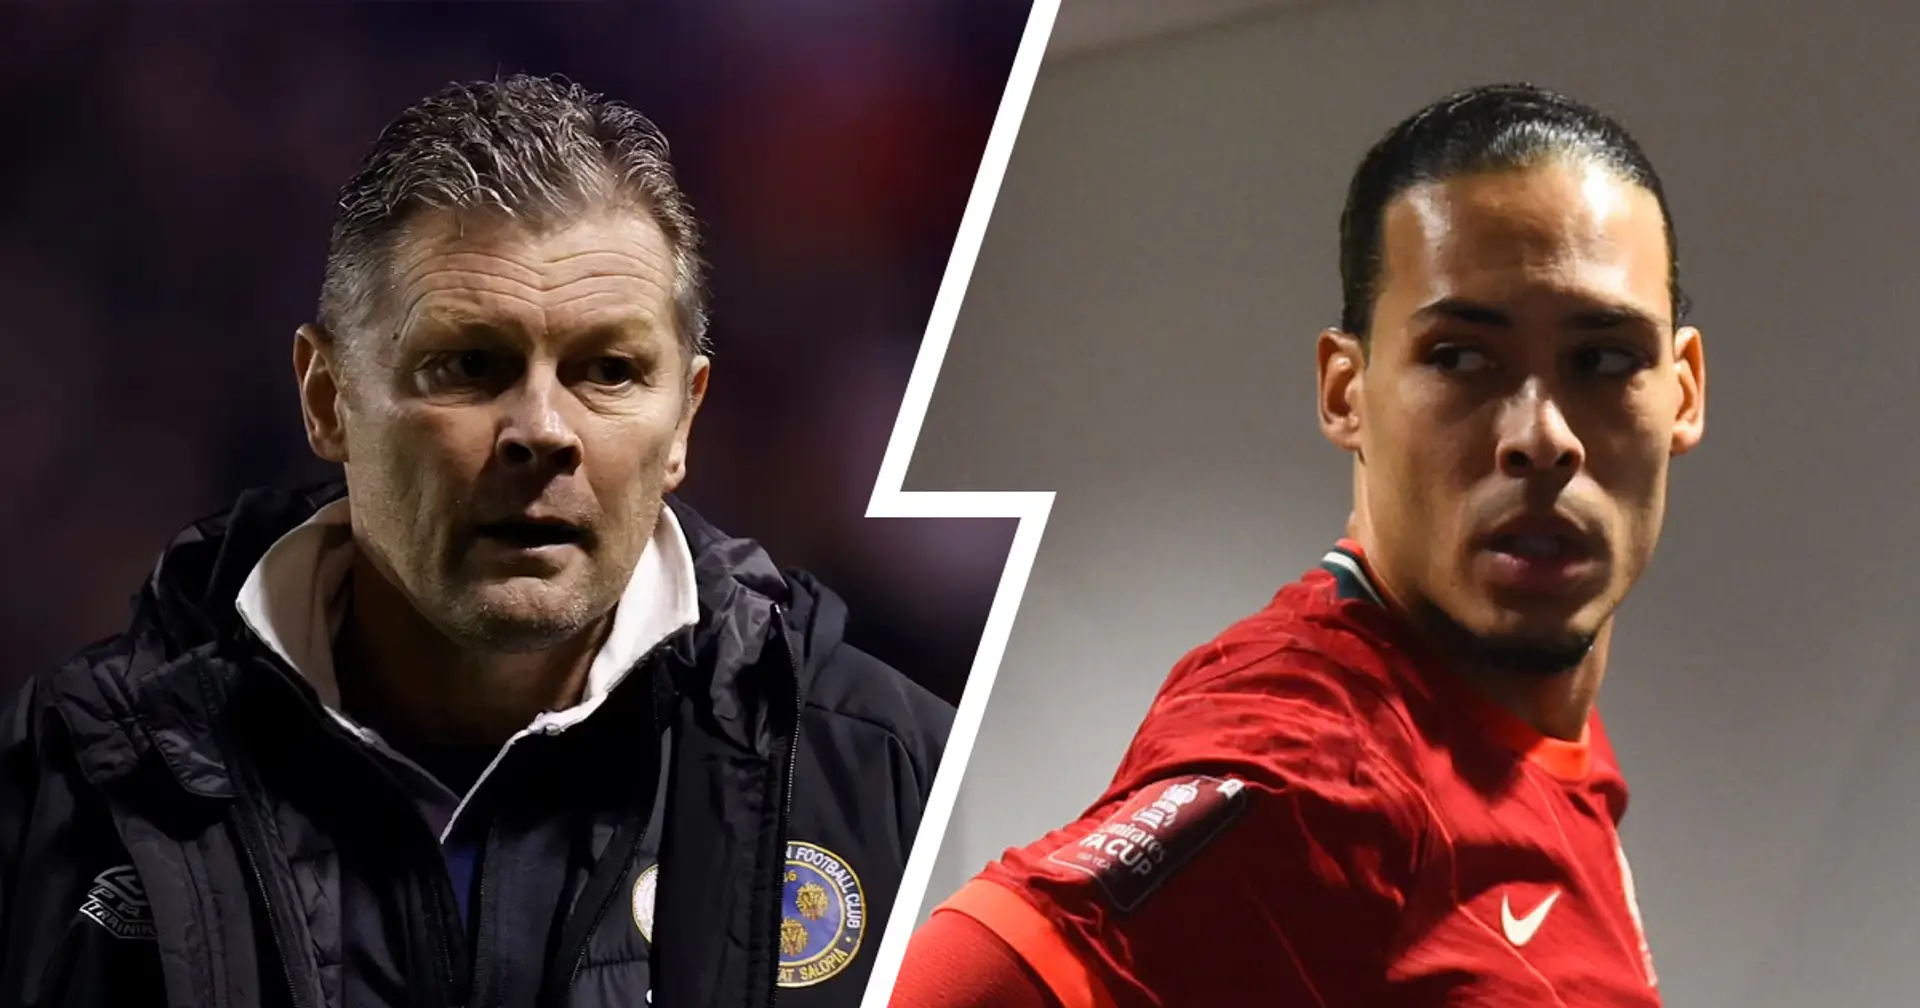 Shrewsbury boss reveals classy touch from Virgil van Dijk after FA Cup game